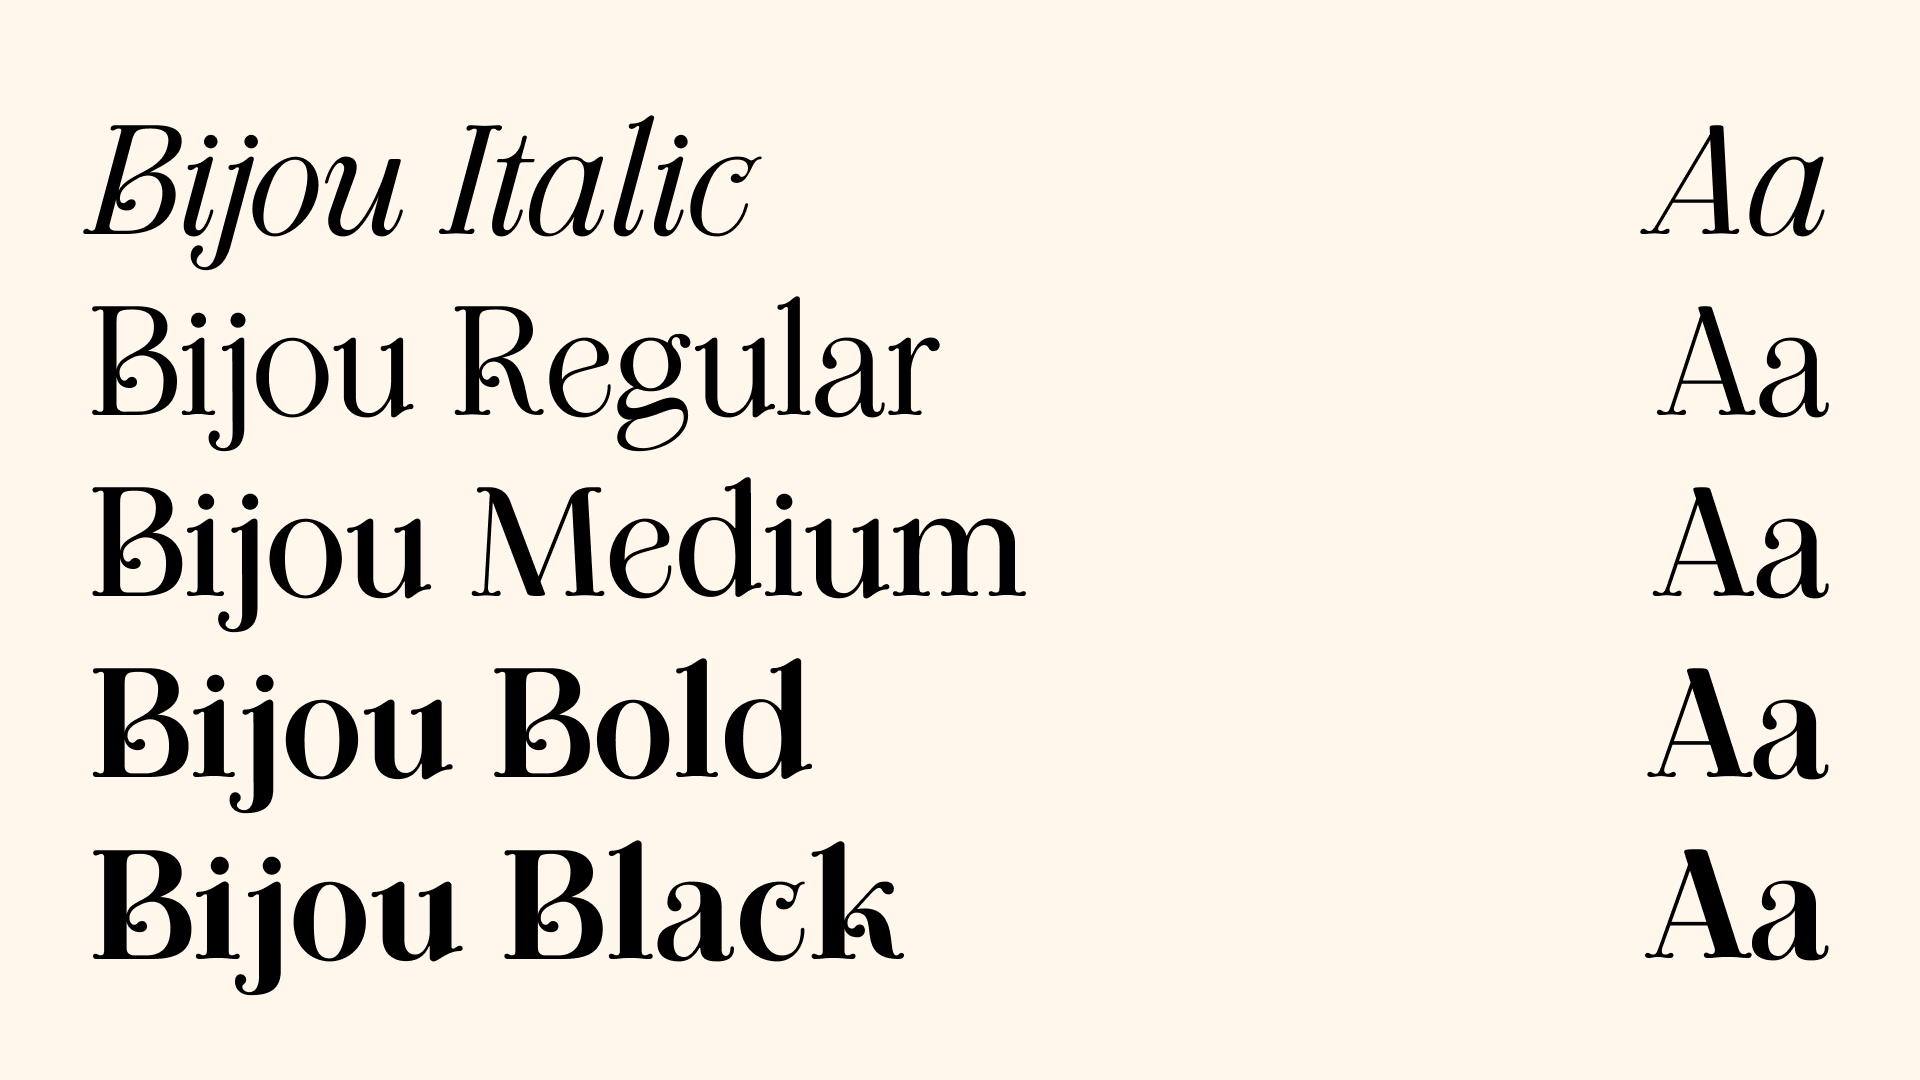 Overview of the family including Italic, Regular, Medium, Bold, and Black.